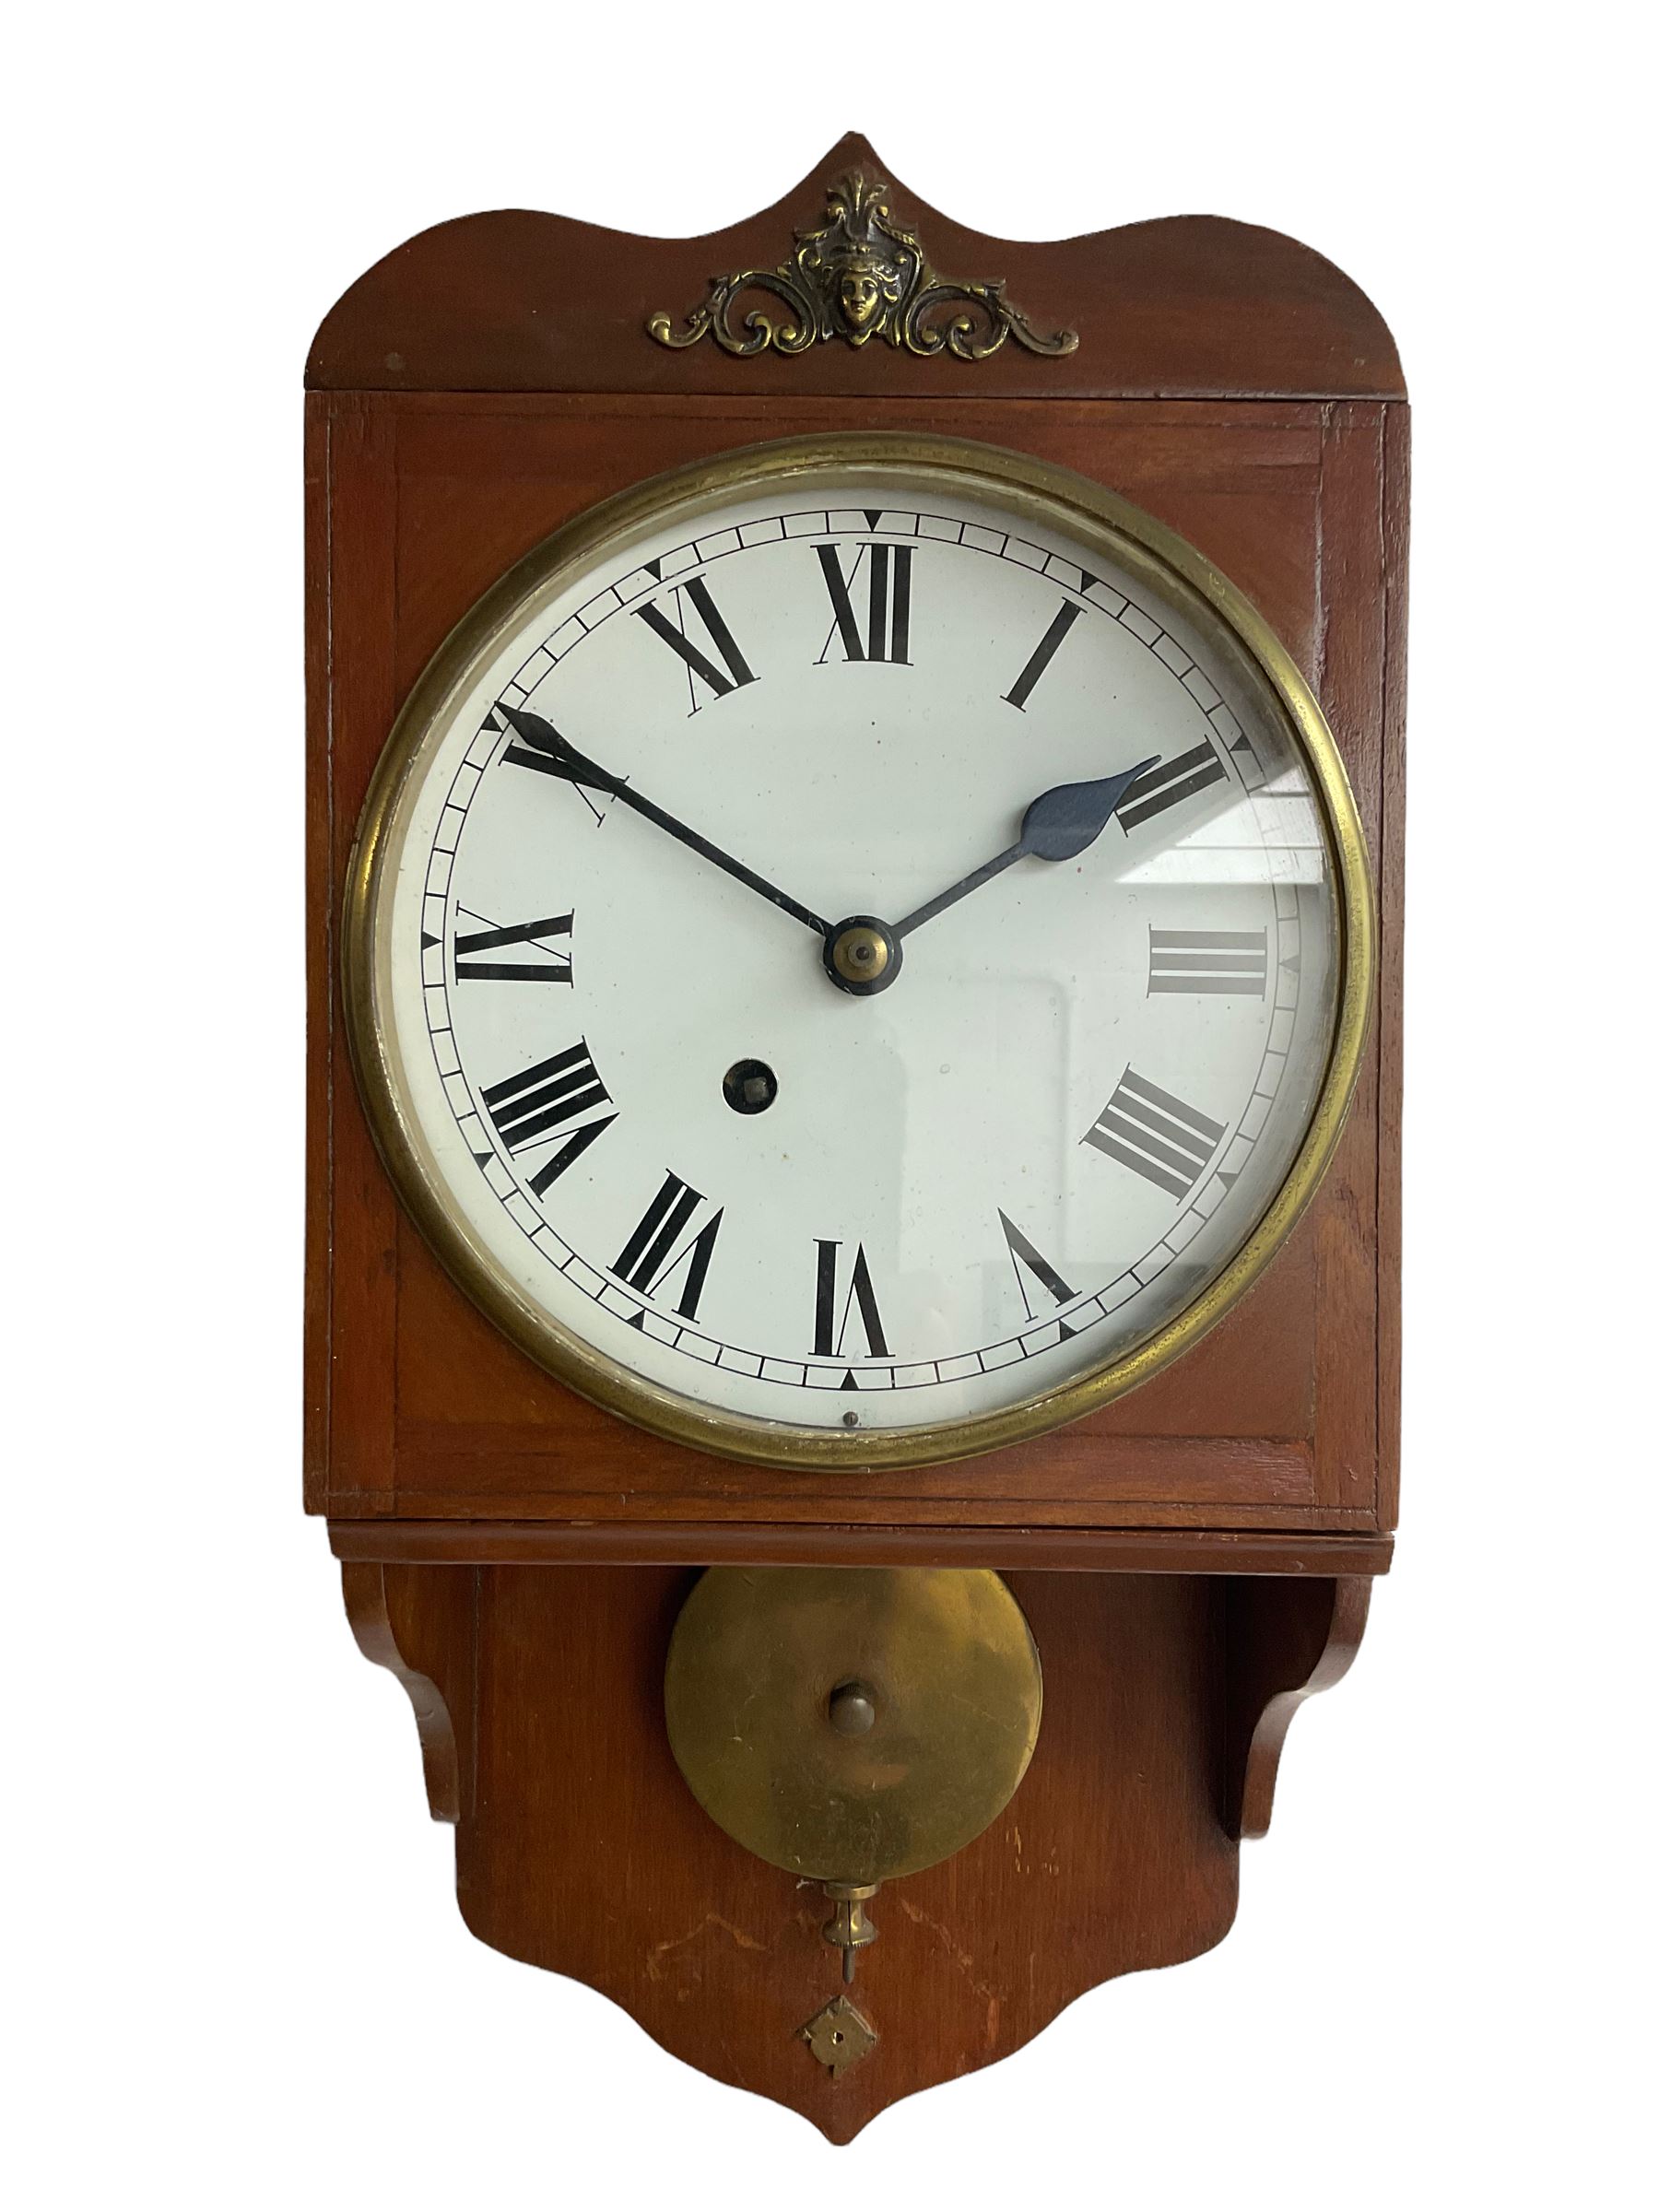 An early 20th century wall clock in a mahogany case - Image 4 of 4